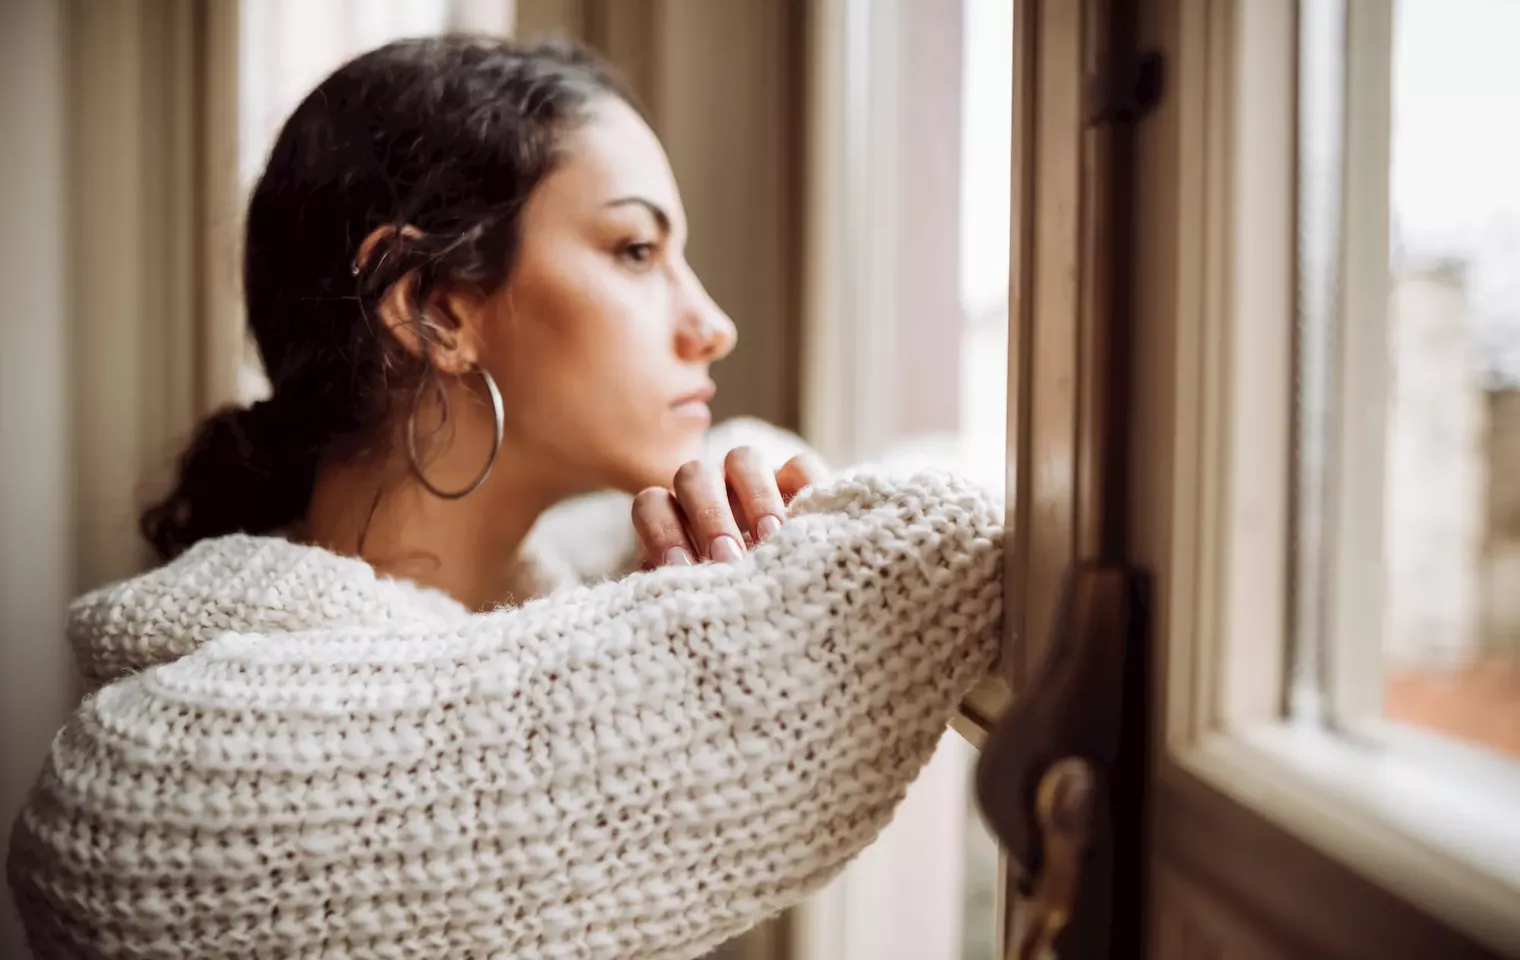 Pensive woman in front of window